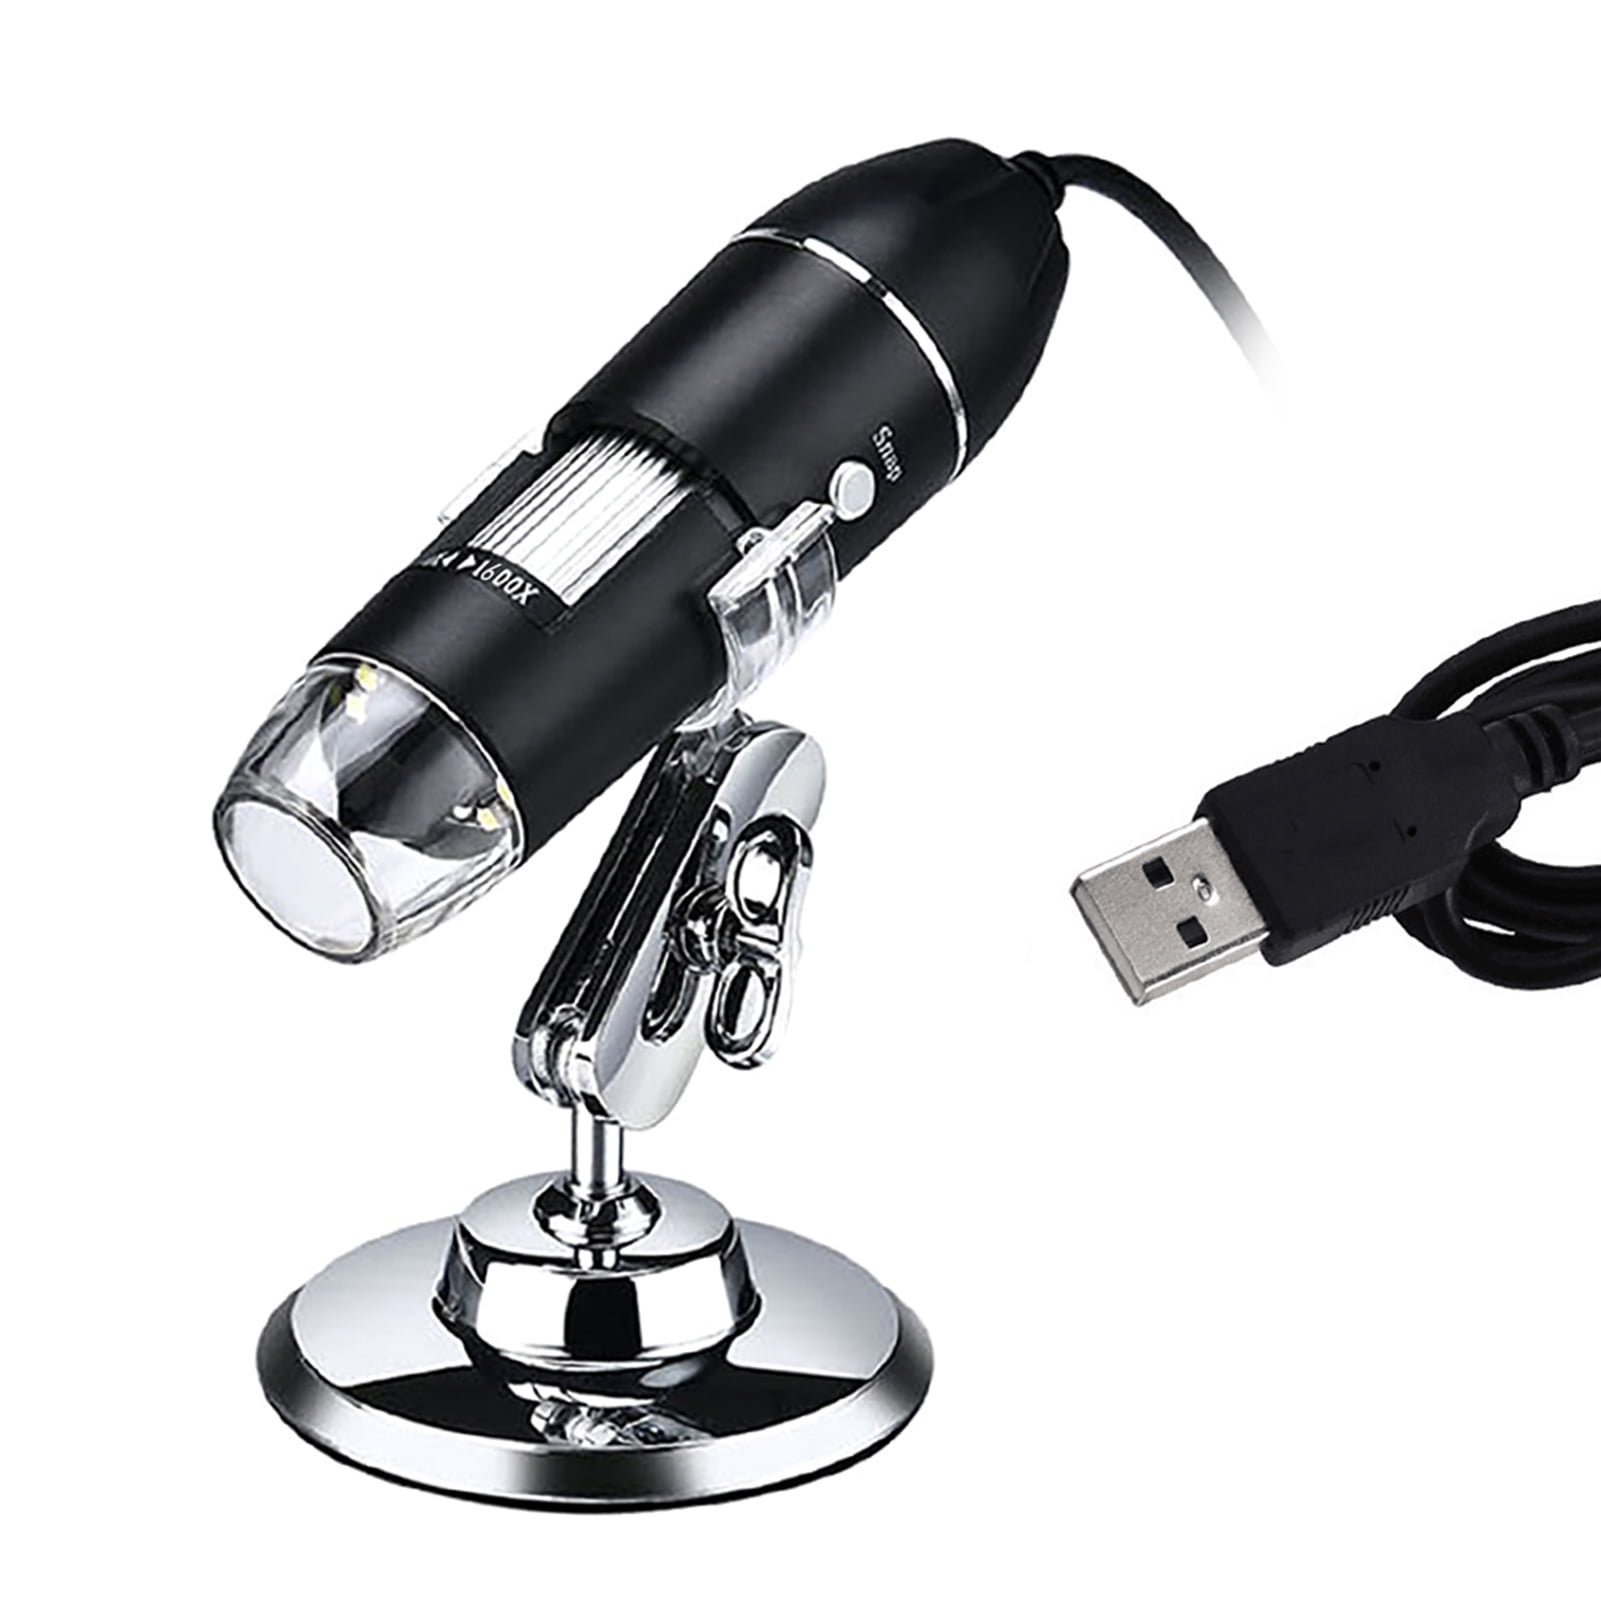 Andoer USB Digital Microscope 1600X Magnification 8 LEDs with Stand Compatible with Windows/ XP Win 7 8 10 Vista Linux Handheld Magnifier - Walmart.com